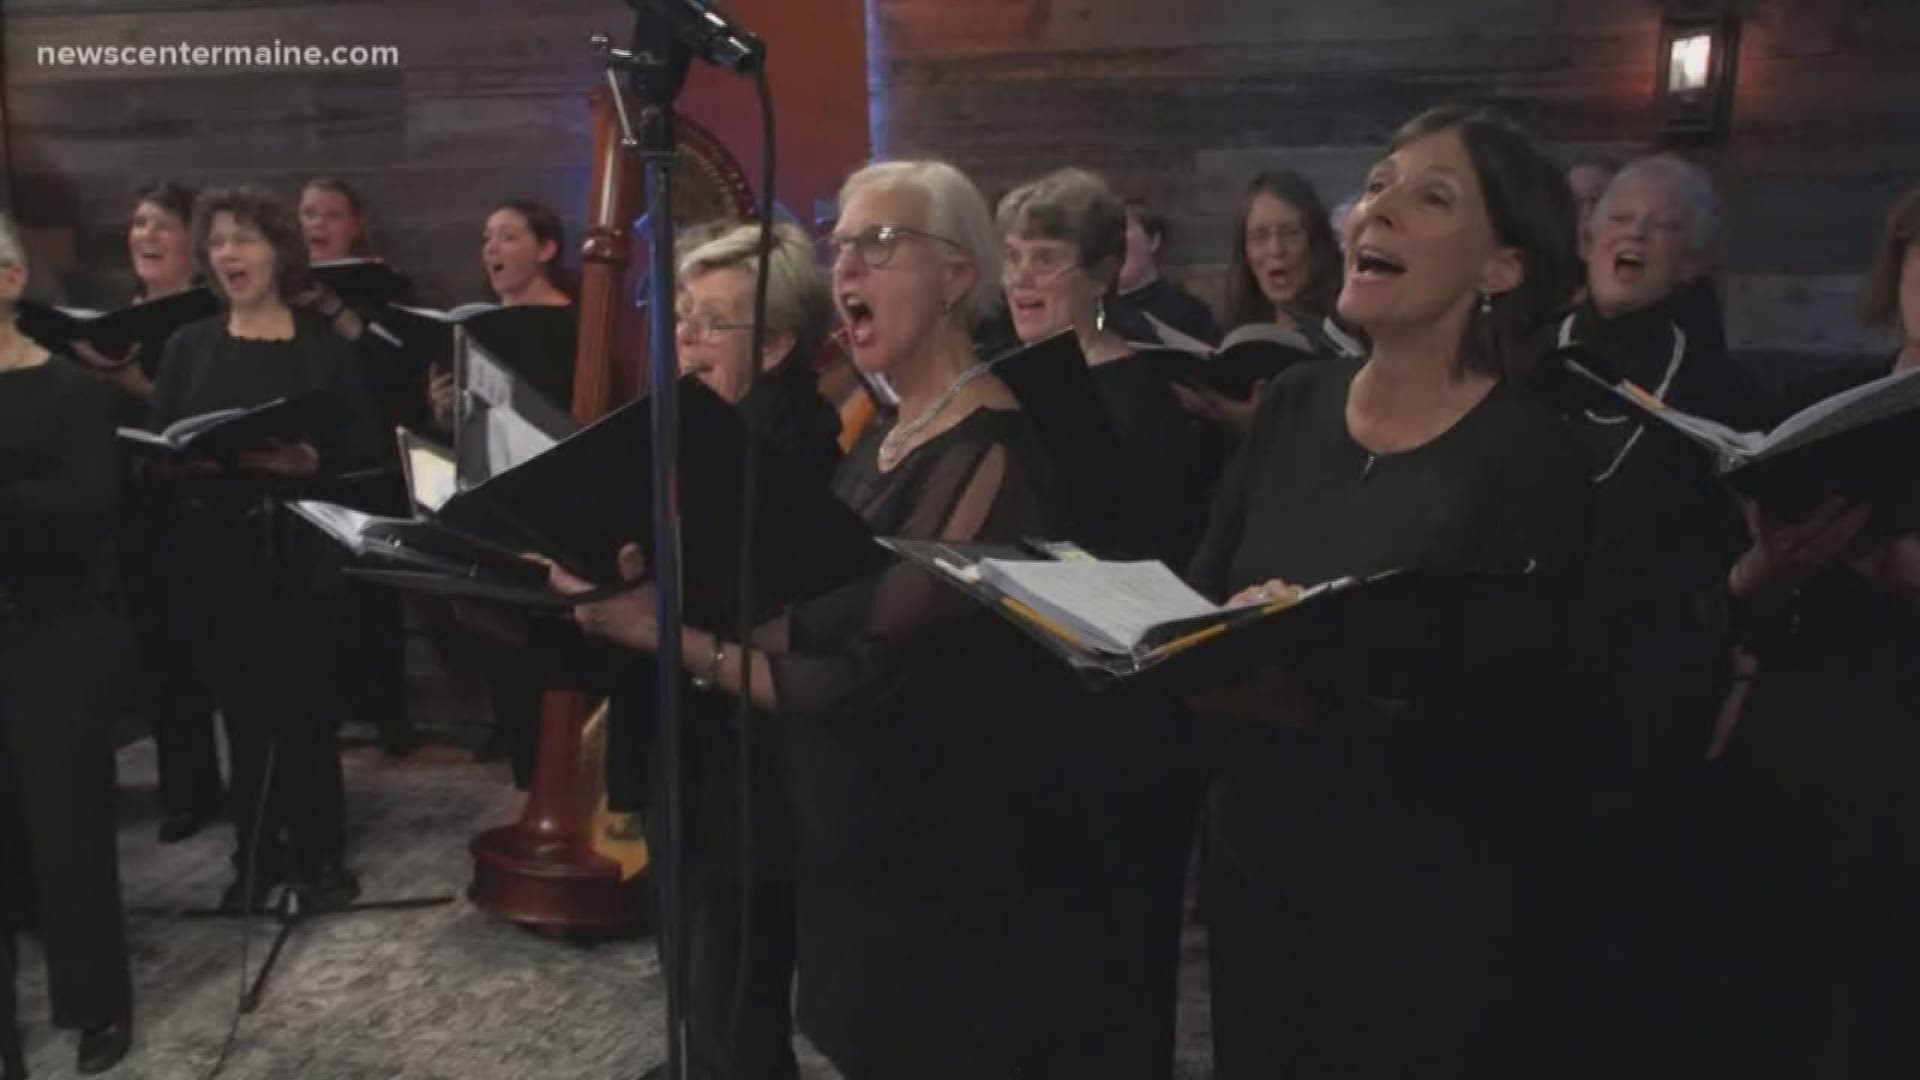 Sweetest in the Gale is a subgroup of Oratorio Chorale that has harmonies that ring like bells.